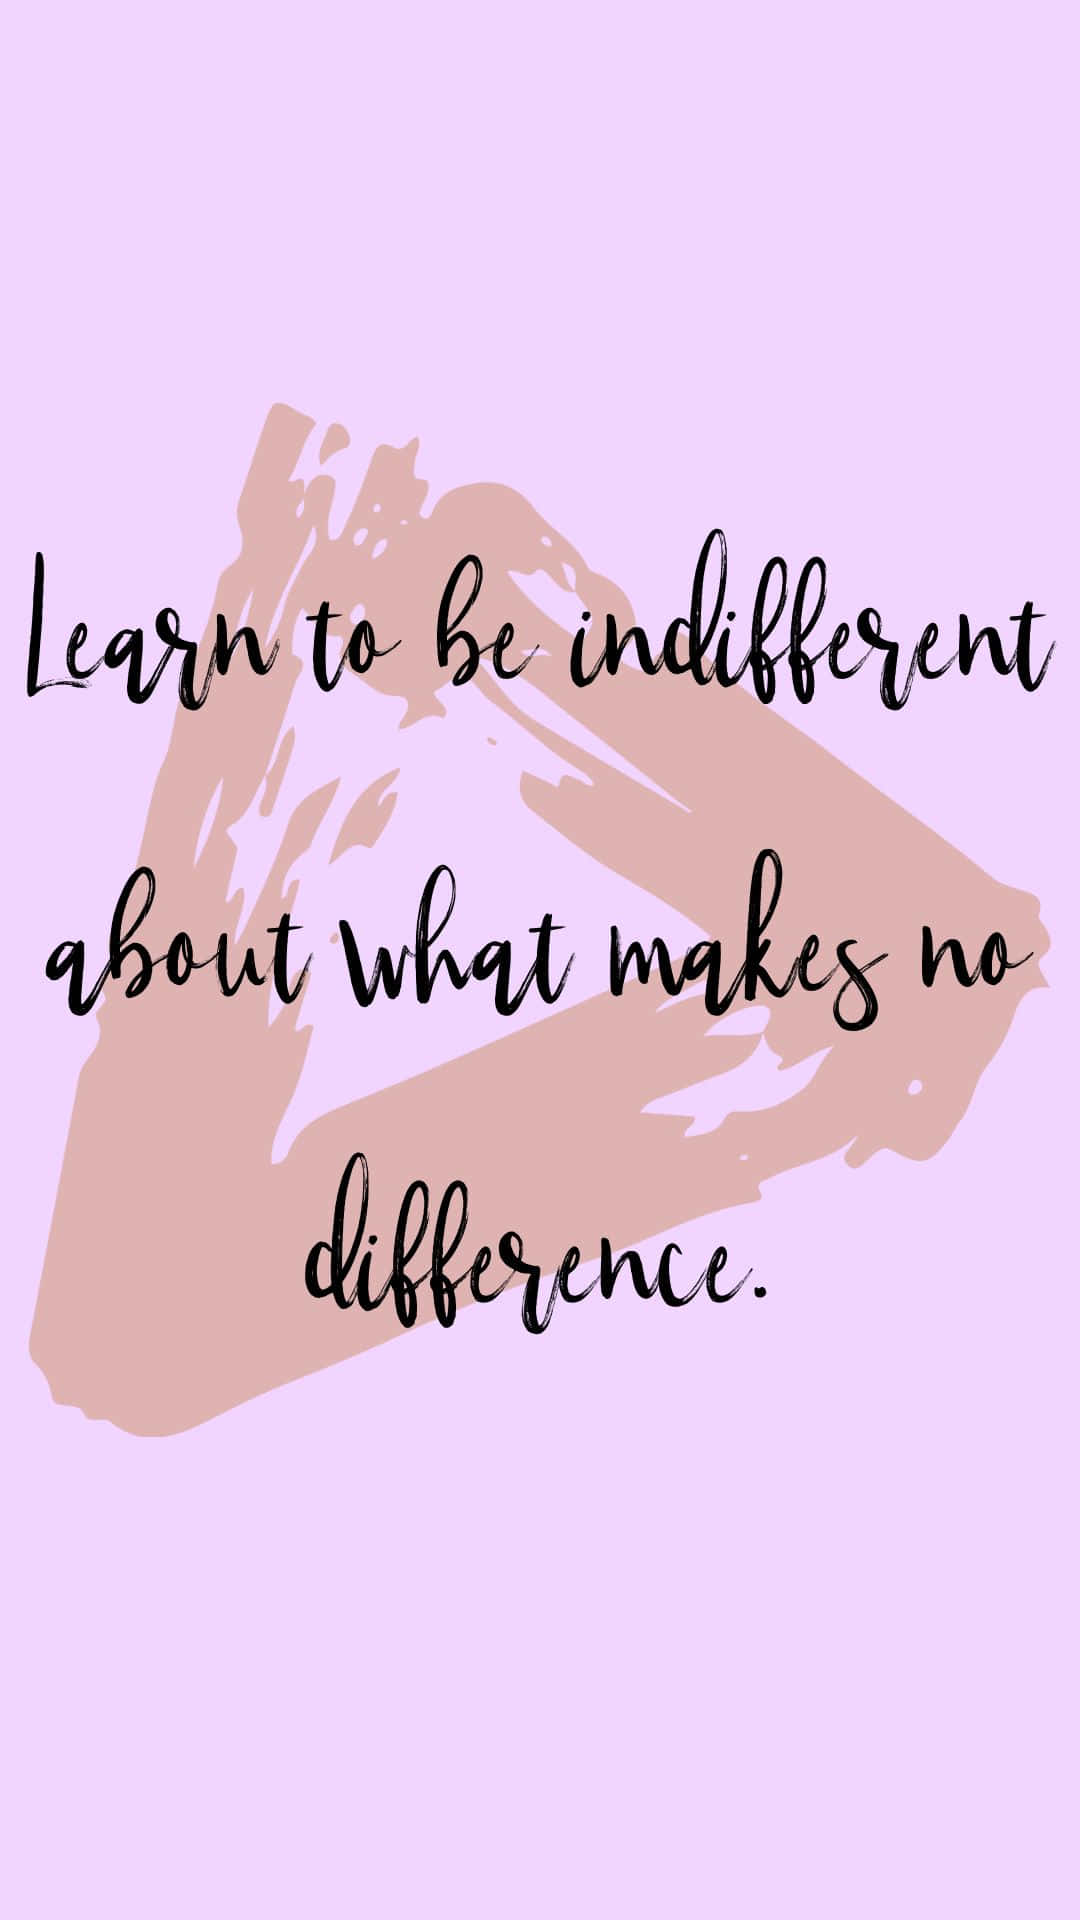 Being Indifferent About What Makes No Difference Wallpaper